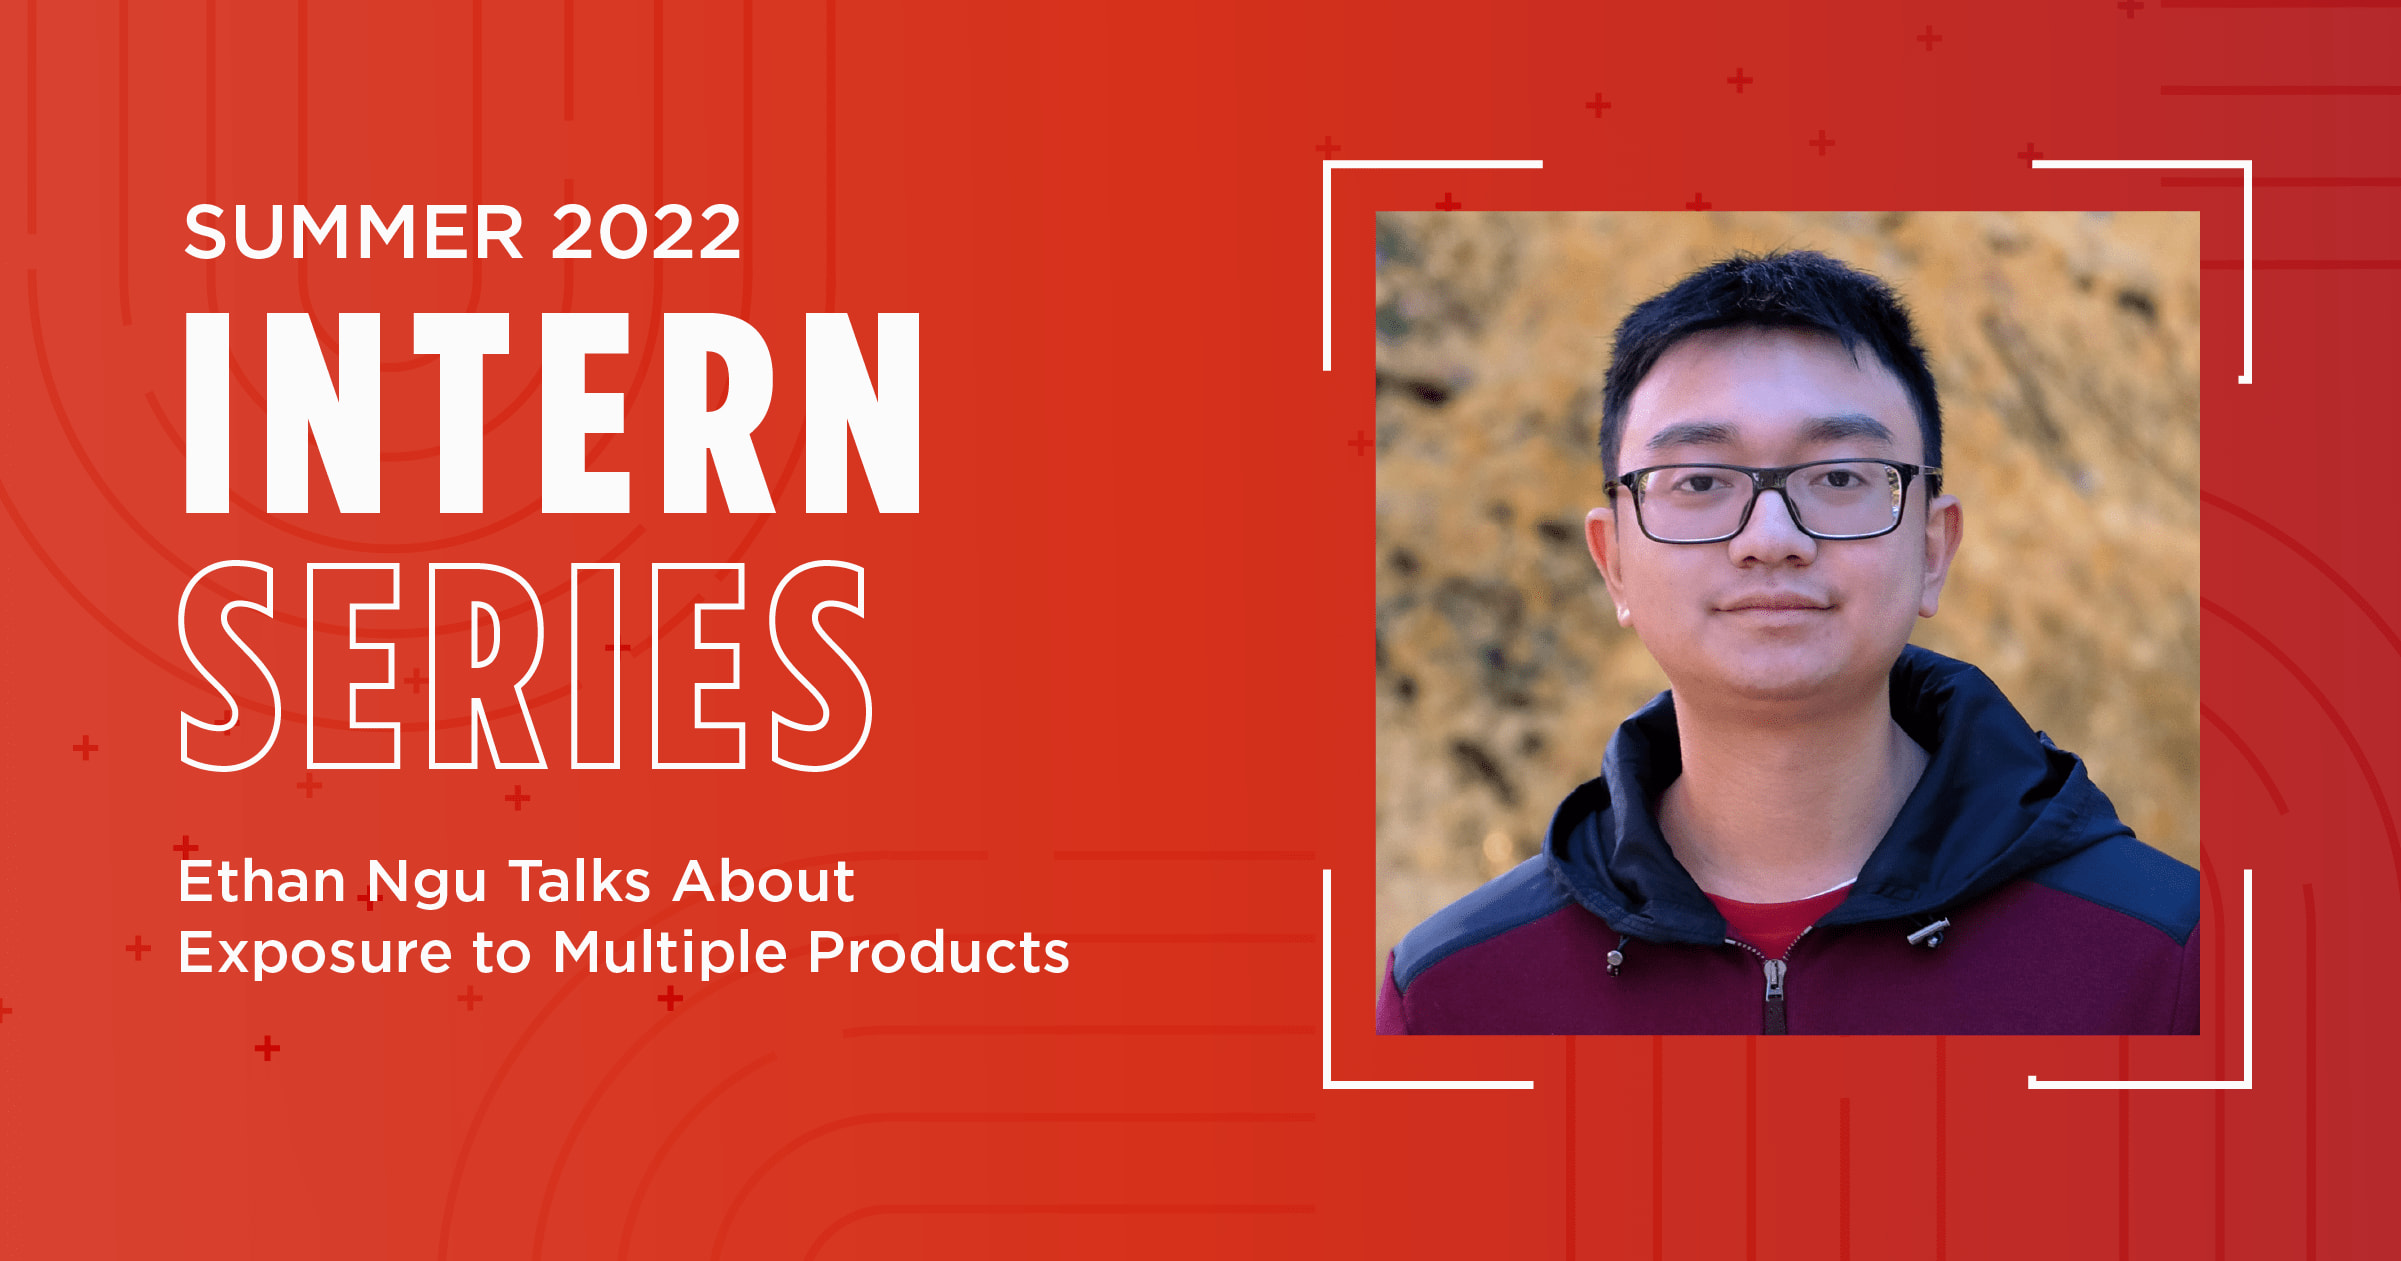 A blog's open graph image titled 'Summer 2022 Intern Series: Ethan Ngu Talks About Exposure to Multiple Products' and bearing a headshot of Ethan Ngu.